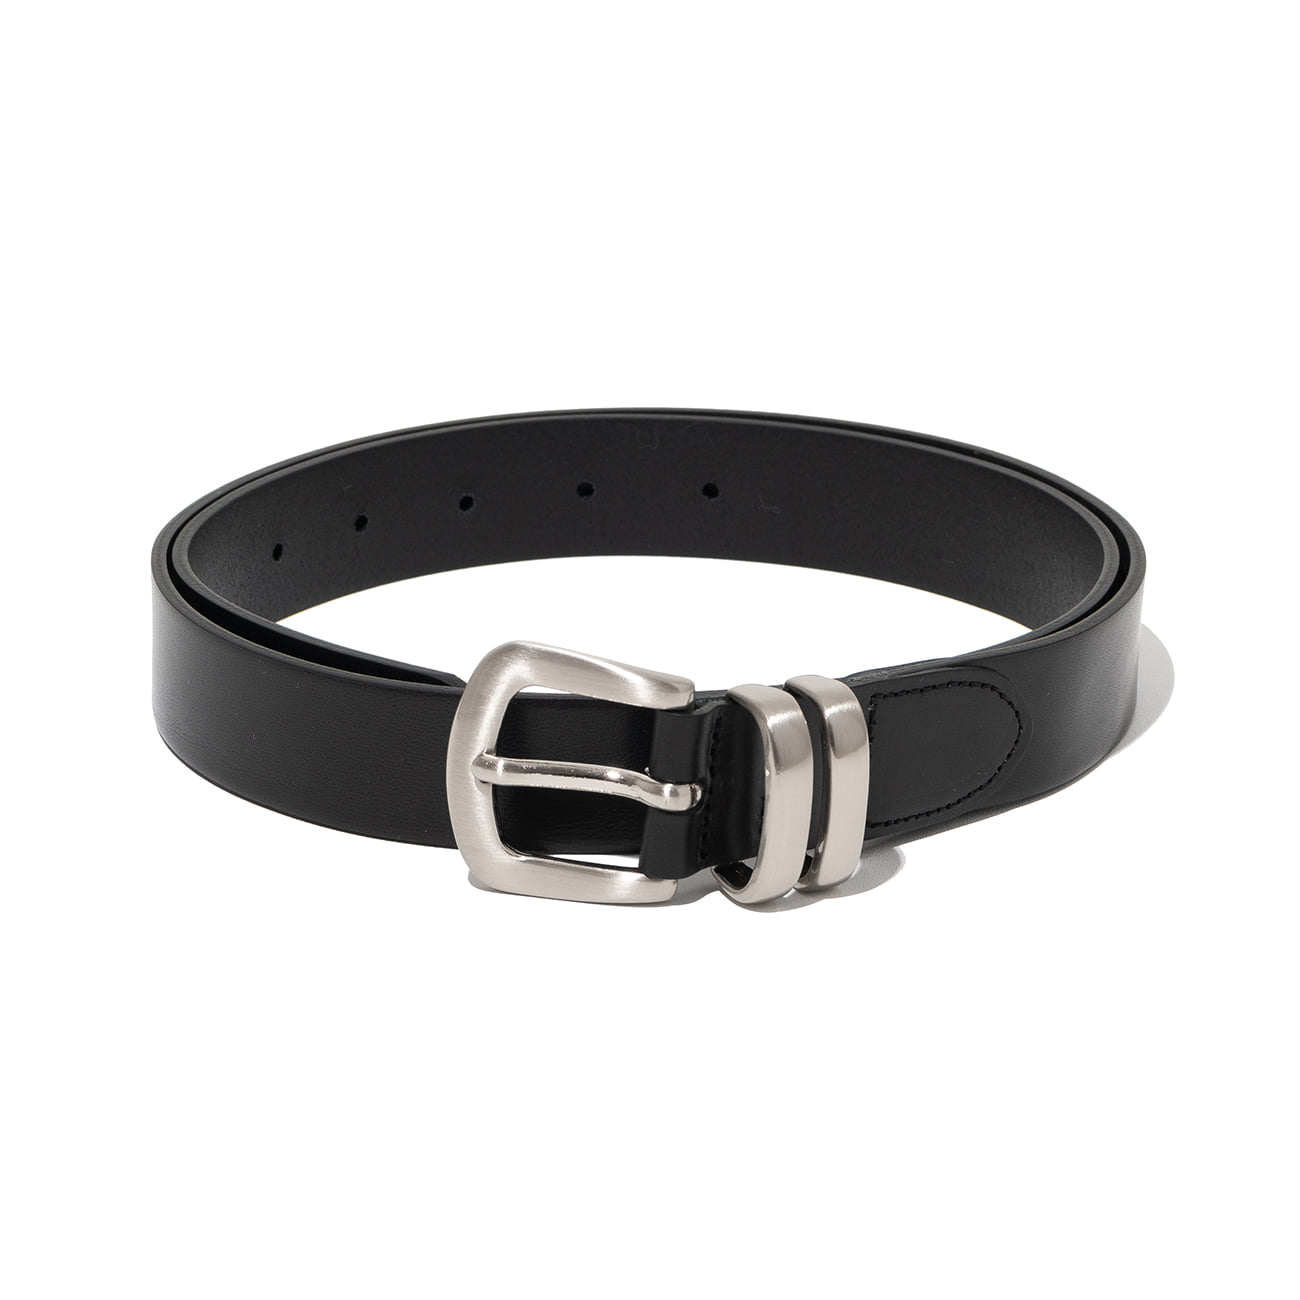 ESSENTIAL TWO RINGS LEATHER BELT #1